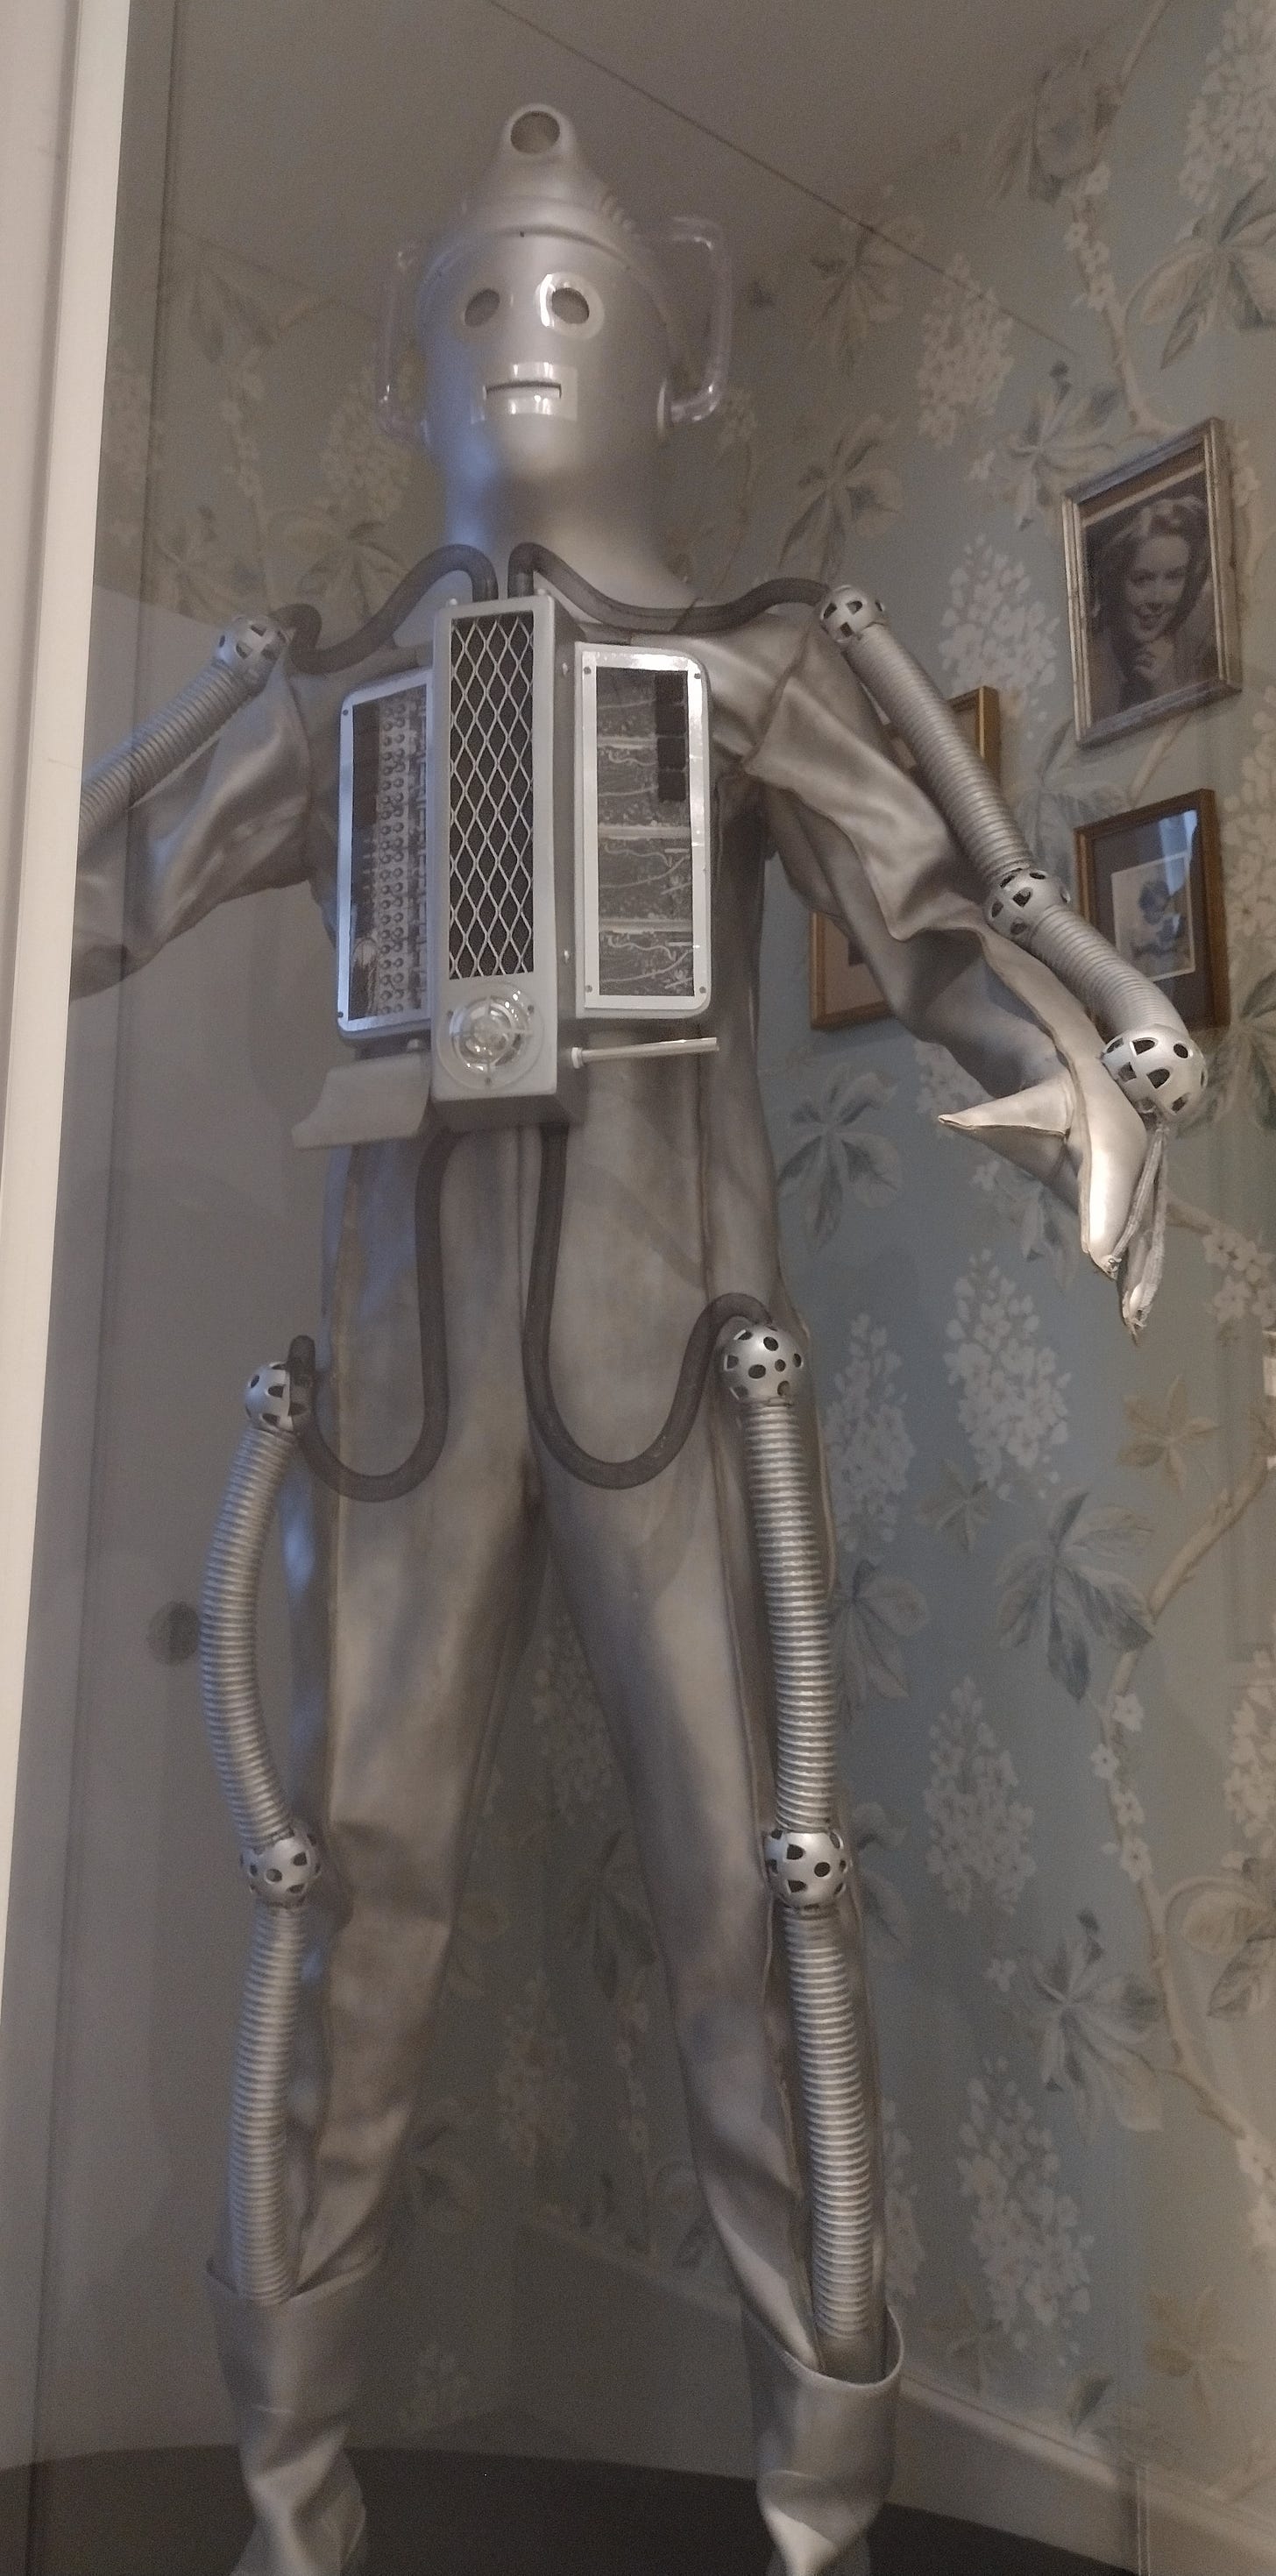 A Cyberman costume of the variety seen in The Moonbase